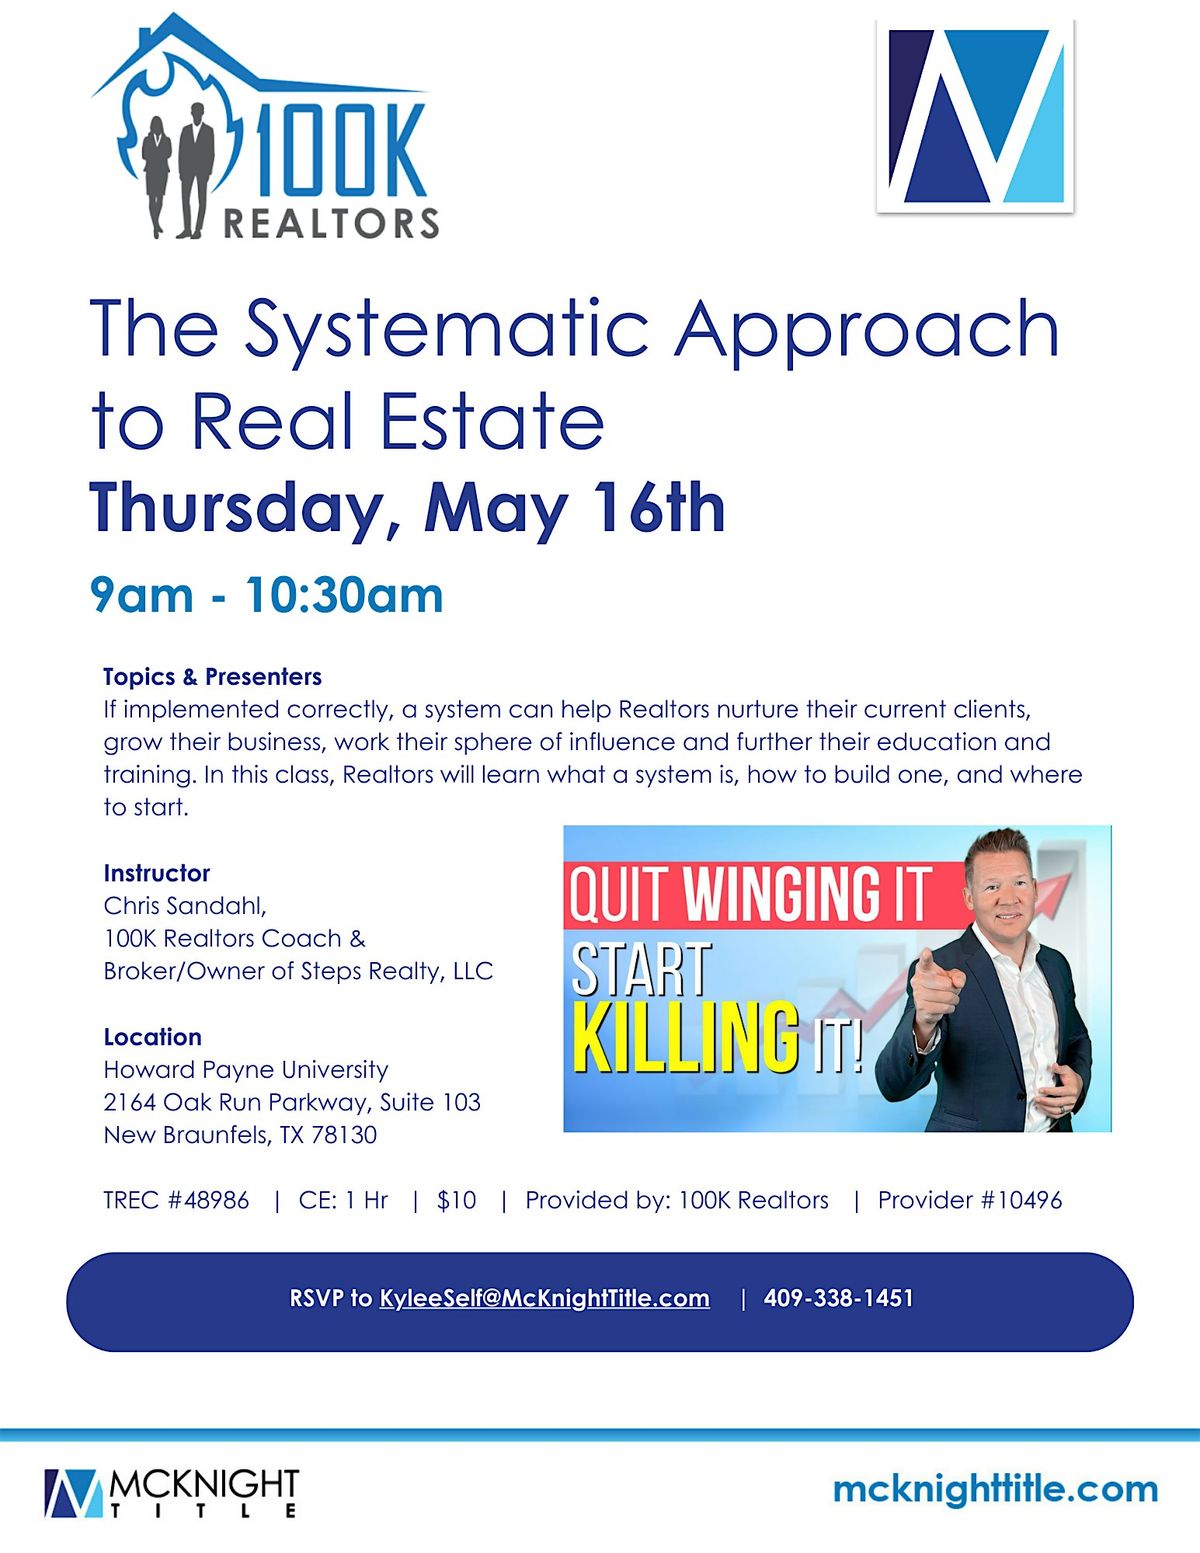 The Systematic Approach to Real Estate